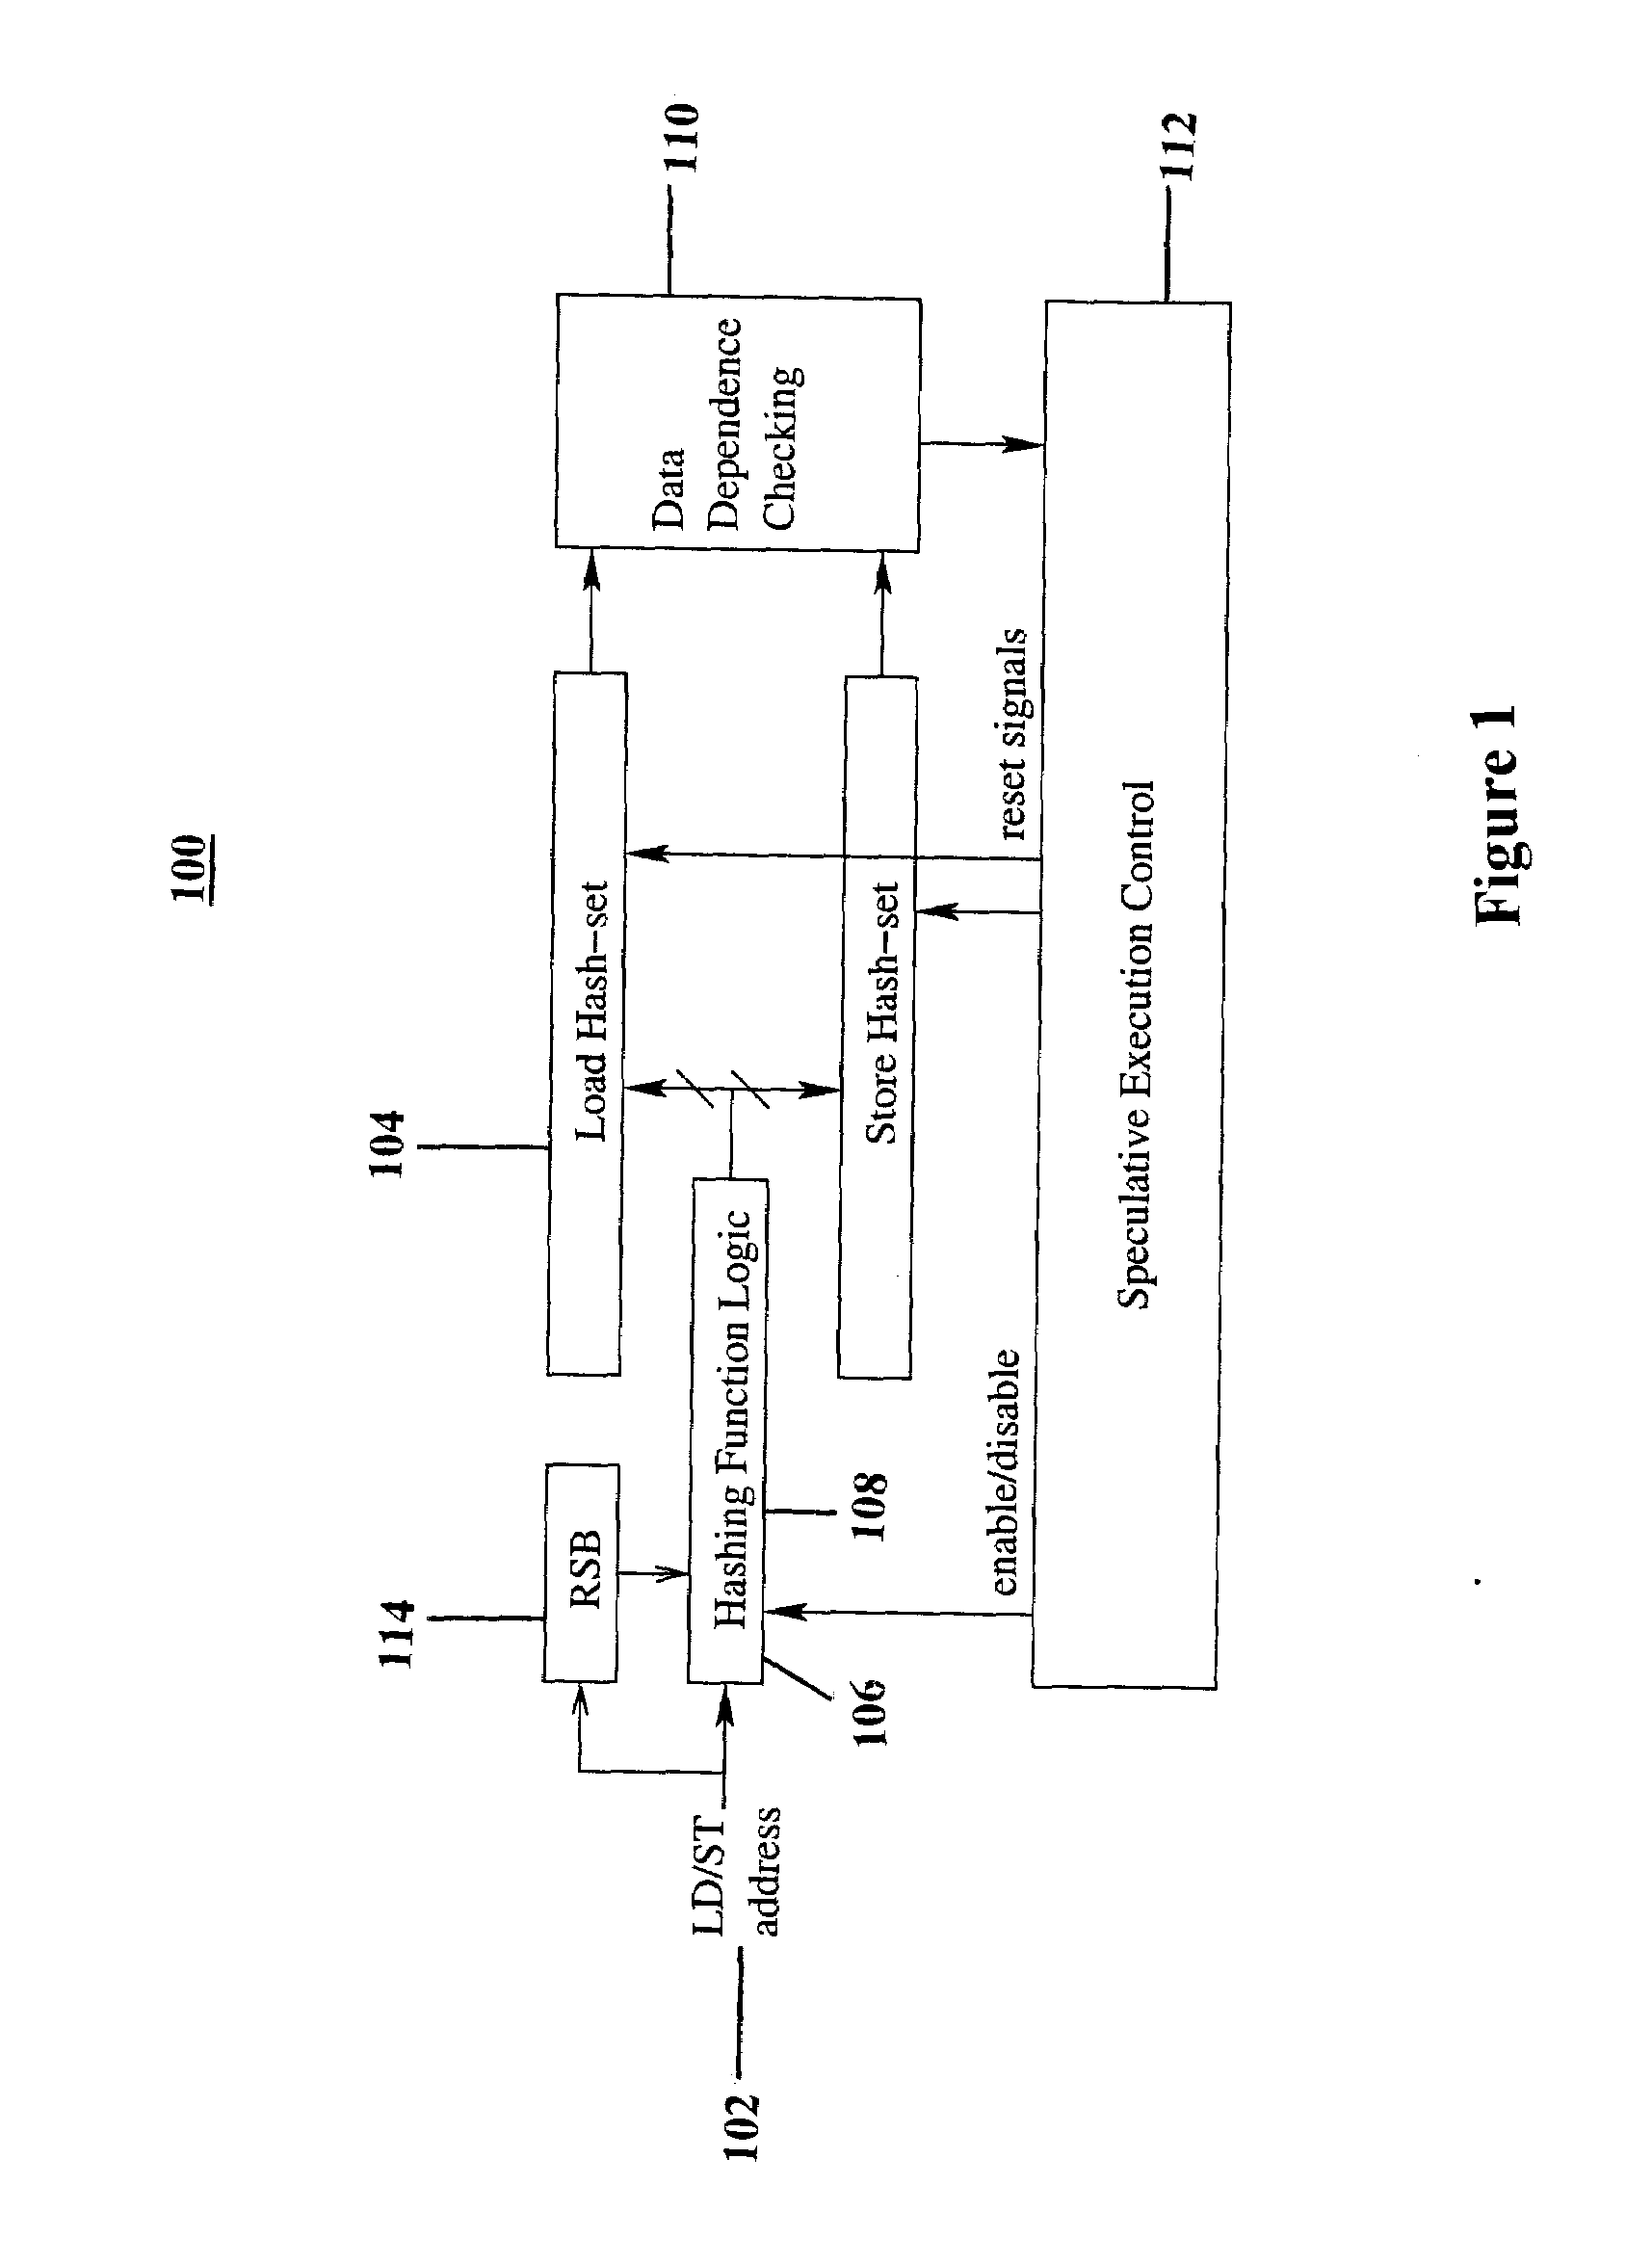 Method and apparatus for implementing efficient data dependence tracking for multiprocessor architectures